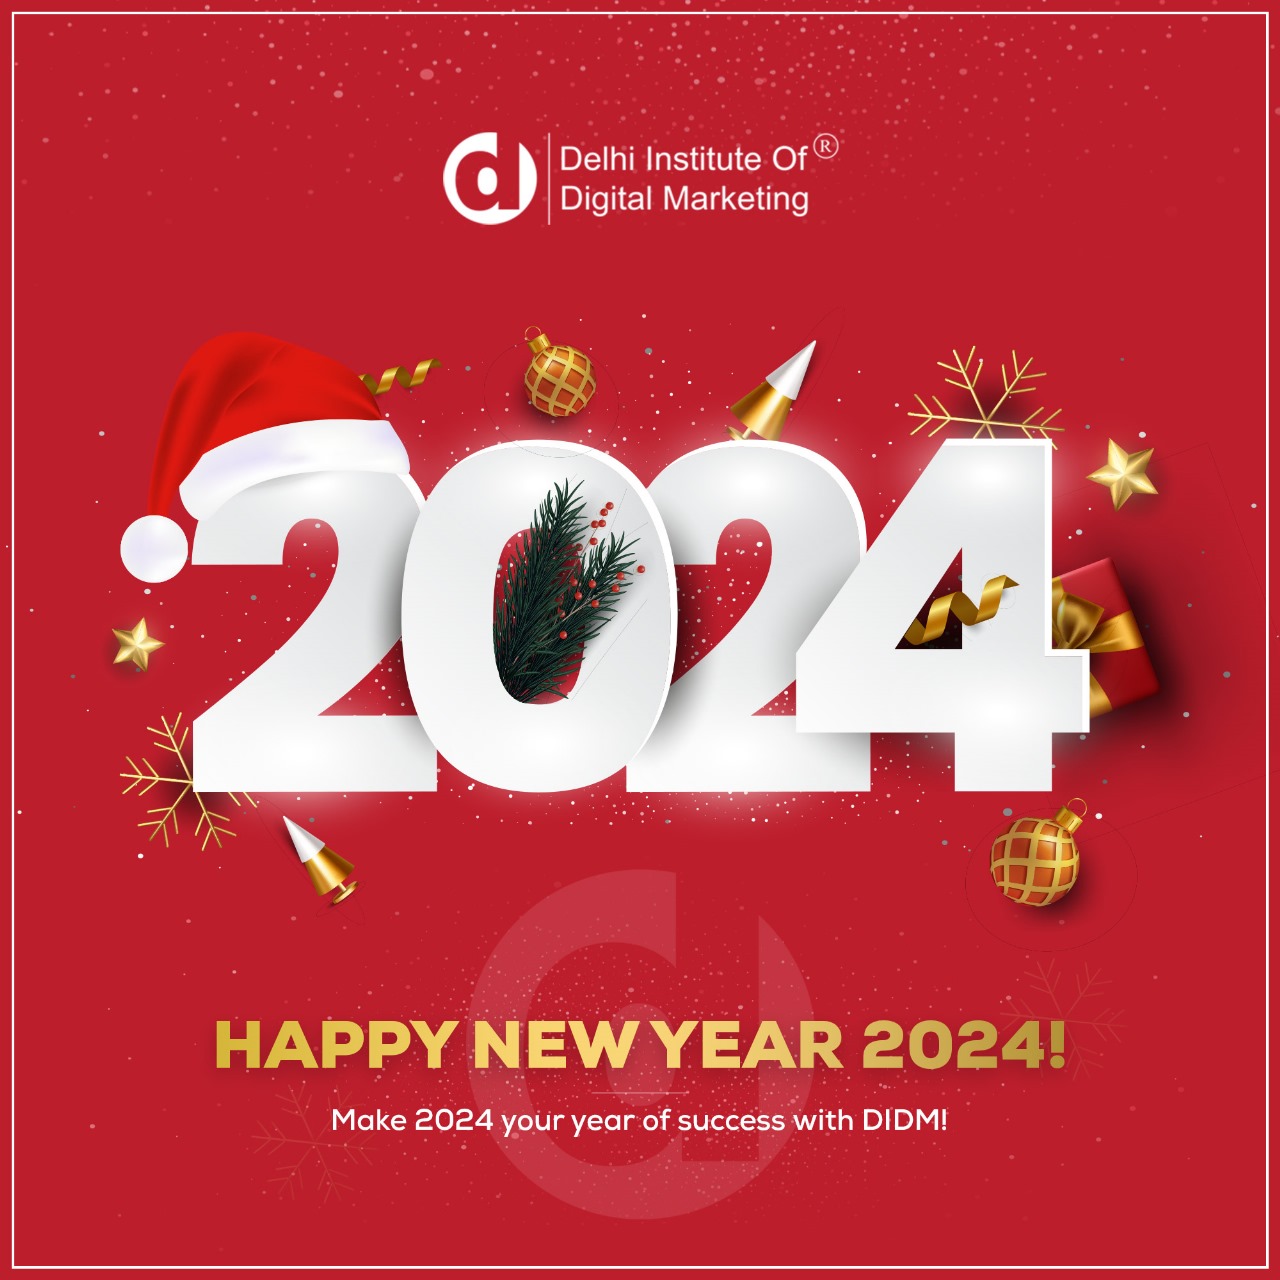 Happy New Year 2024 from Team DIDM